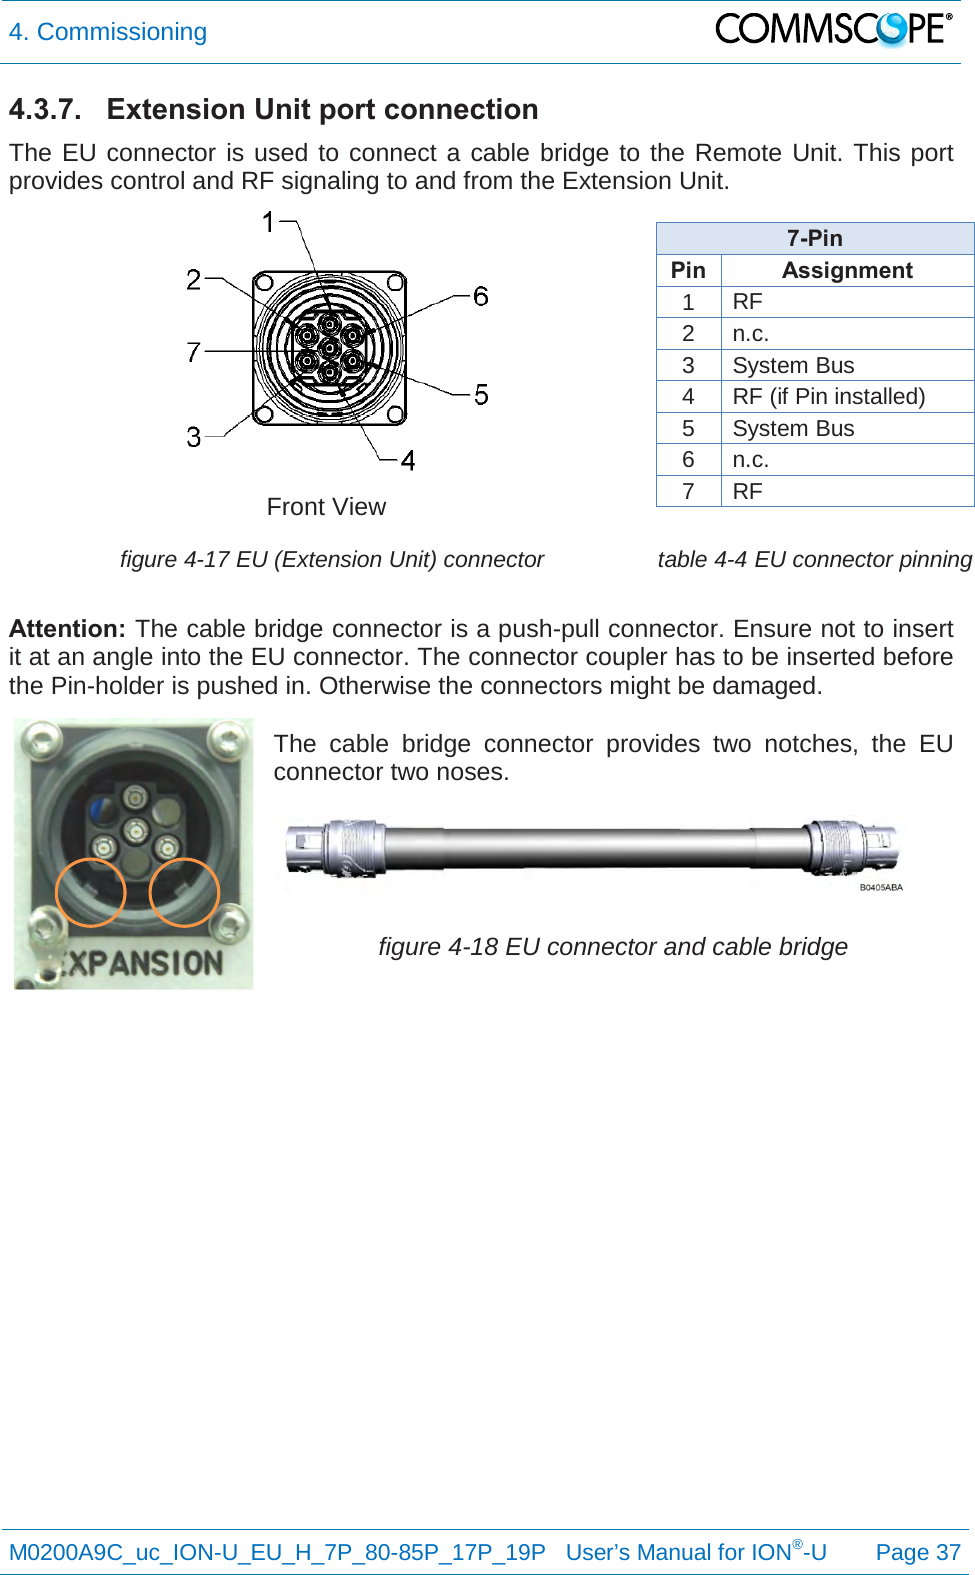 4. Commissioning   M0200A9C_uc_ION-U_EU_H_7P_80-85P_17P_19P   User’s Manual for ION®-U  Page 37  4.3.7.  Extension Unit port connection The EU connector is used to connect a cable bridge to the Remote Unit. This port provides control and RF signaling to and from the Extension Unit.  Front View 7-Pin  Pin Assignment 1 RF 2 n.c. 3 System Bus 4 RF (if Pin installed) 5 System Bus 6 n.c. 7 RF  figure 4-17 EU (Extension Unit) connector table 4-4 EU connector pinning  Attention: The cable bridge connector is a push-pull connector. Ensure not to insert it at an angle into the EU connector. The connector coupler has to be inserted before the Pin-holder is pushed in. Otherwise the connectors might be damaged.  The cable bridge connector provides two notches, the EU connector two noses.    figure 4-18 EU connector and cable bridge     